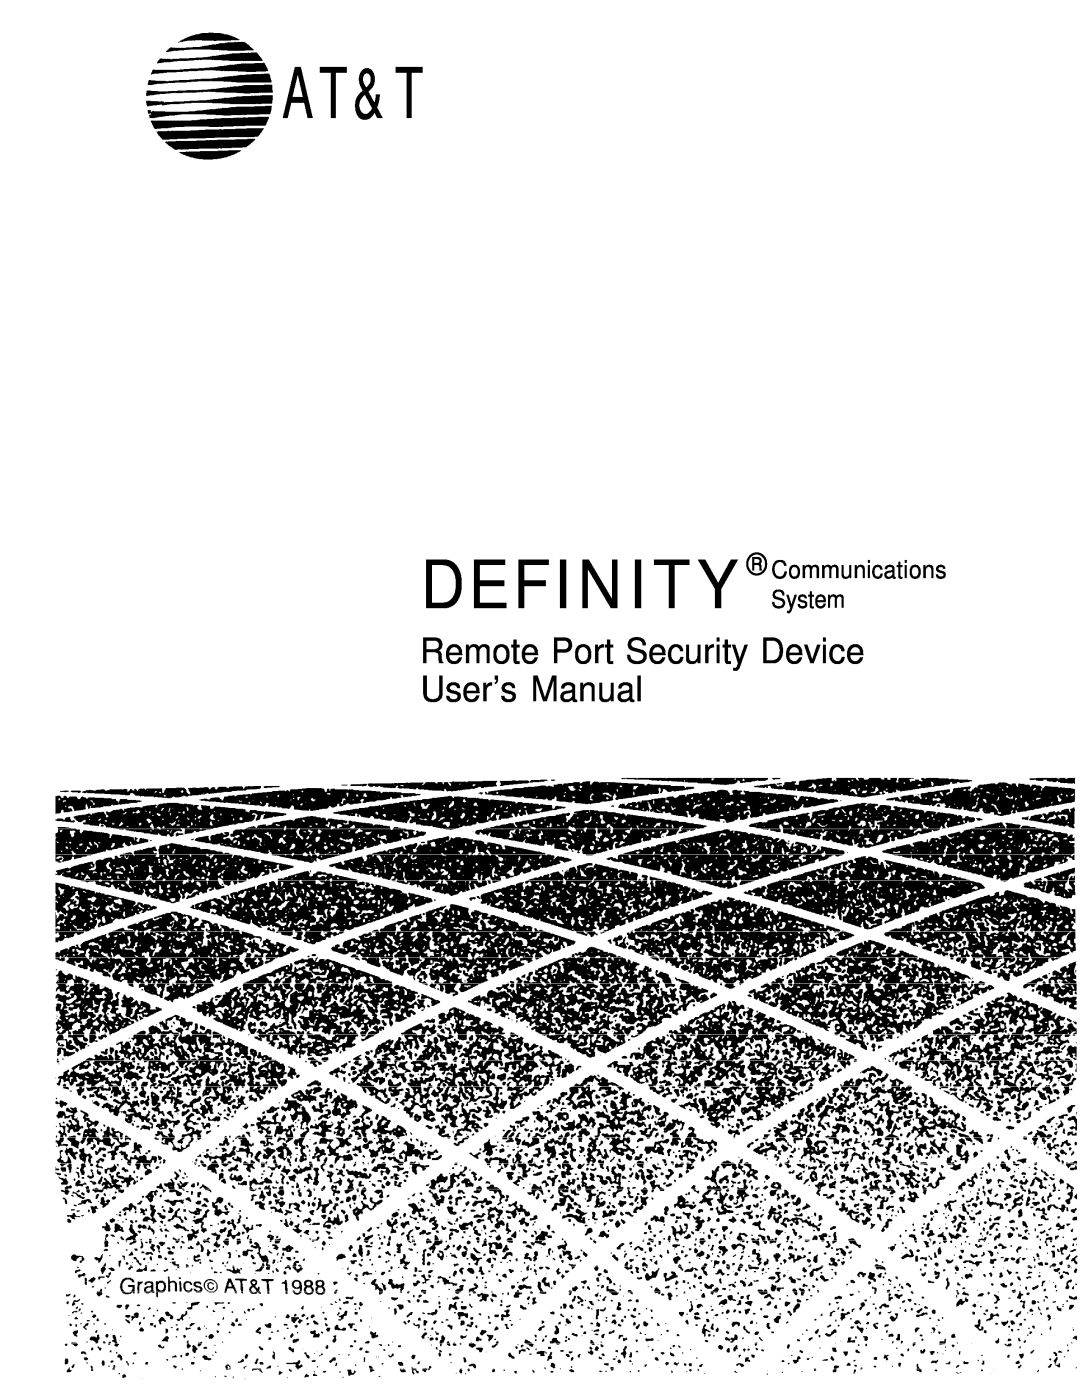 AT&T user manual At&T, DEFINITY System, Remote Port Security Device User’s Manual, Communications 